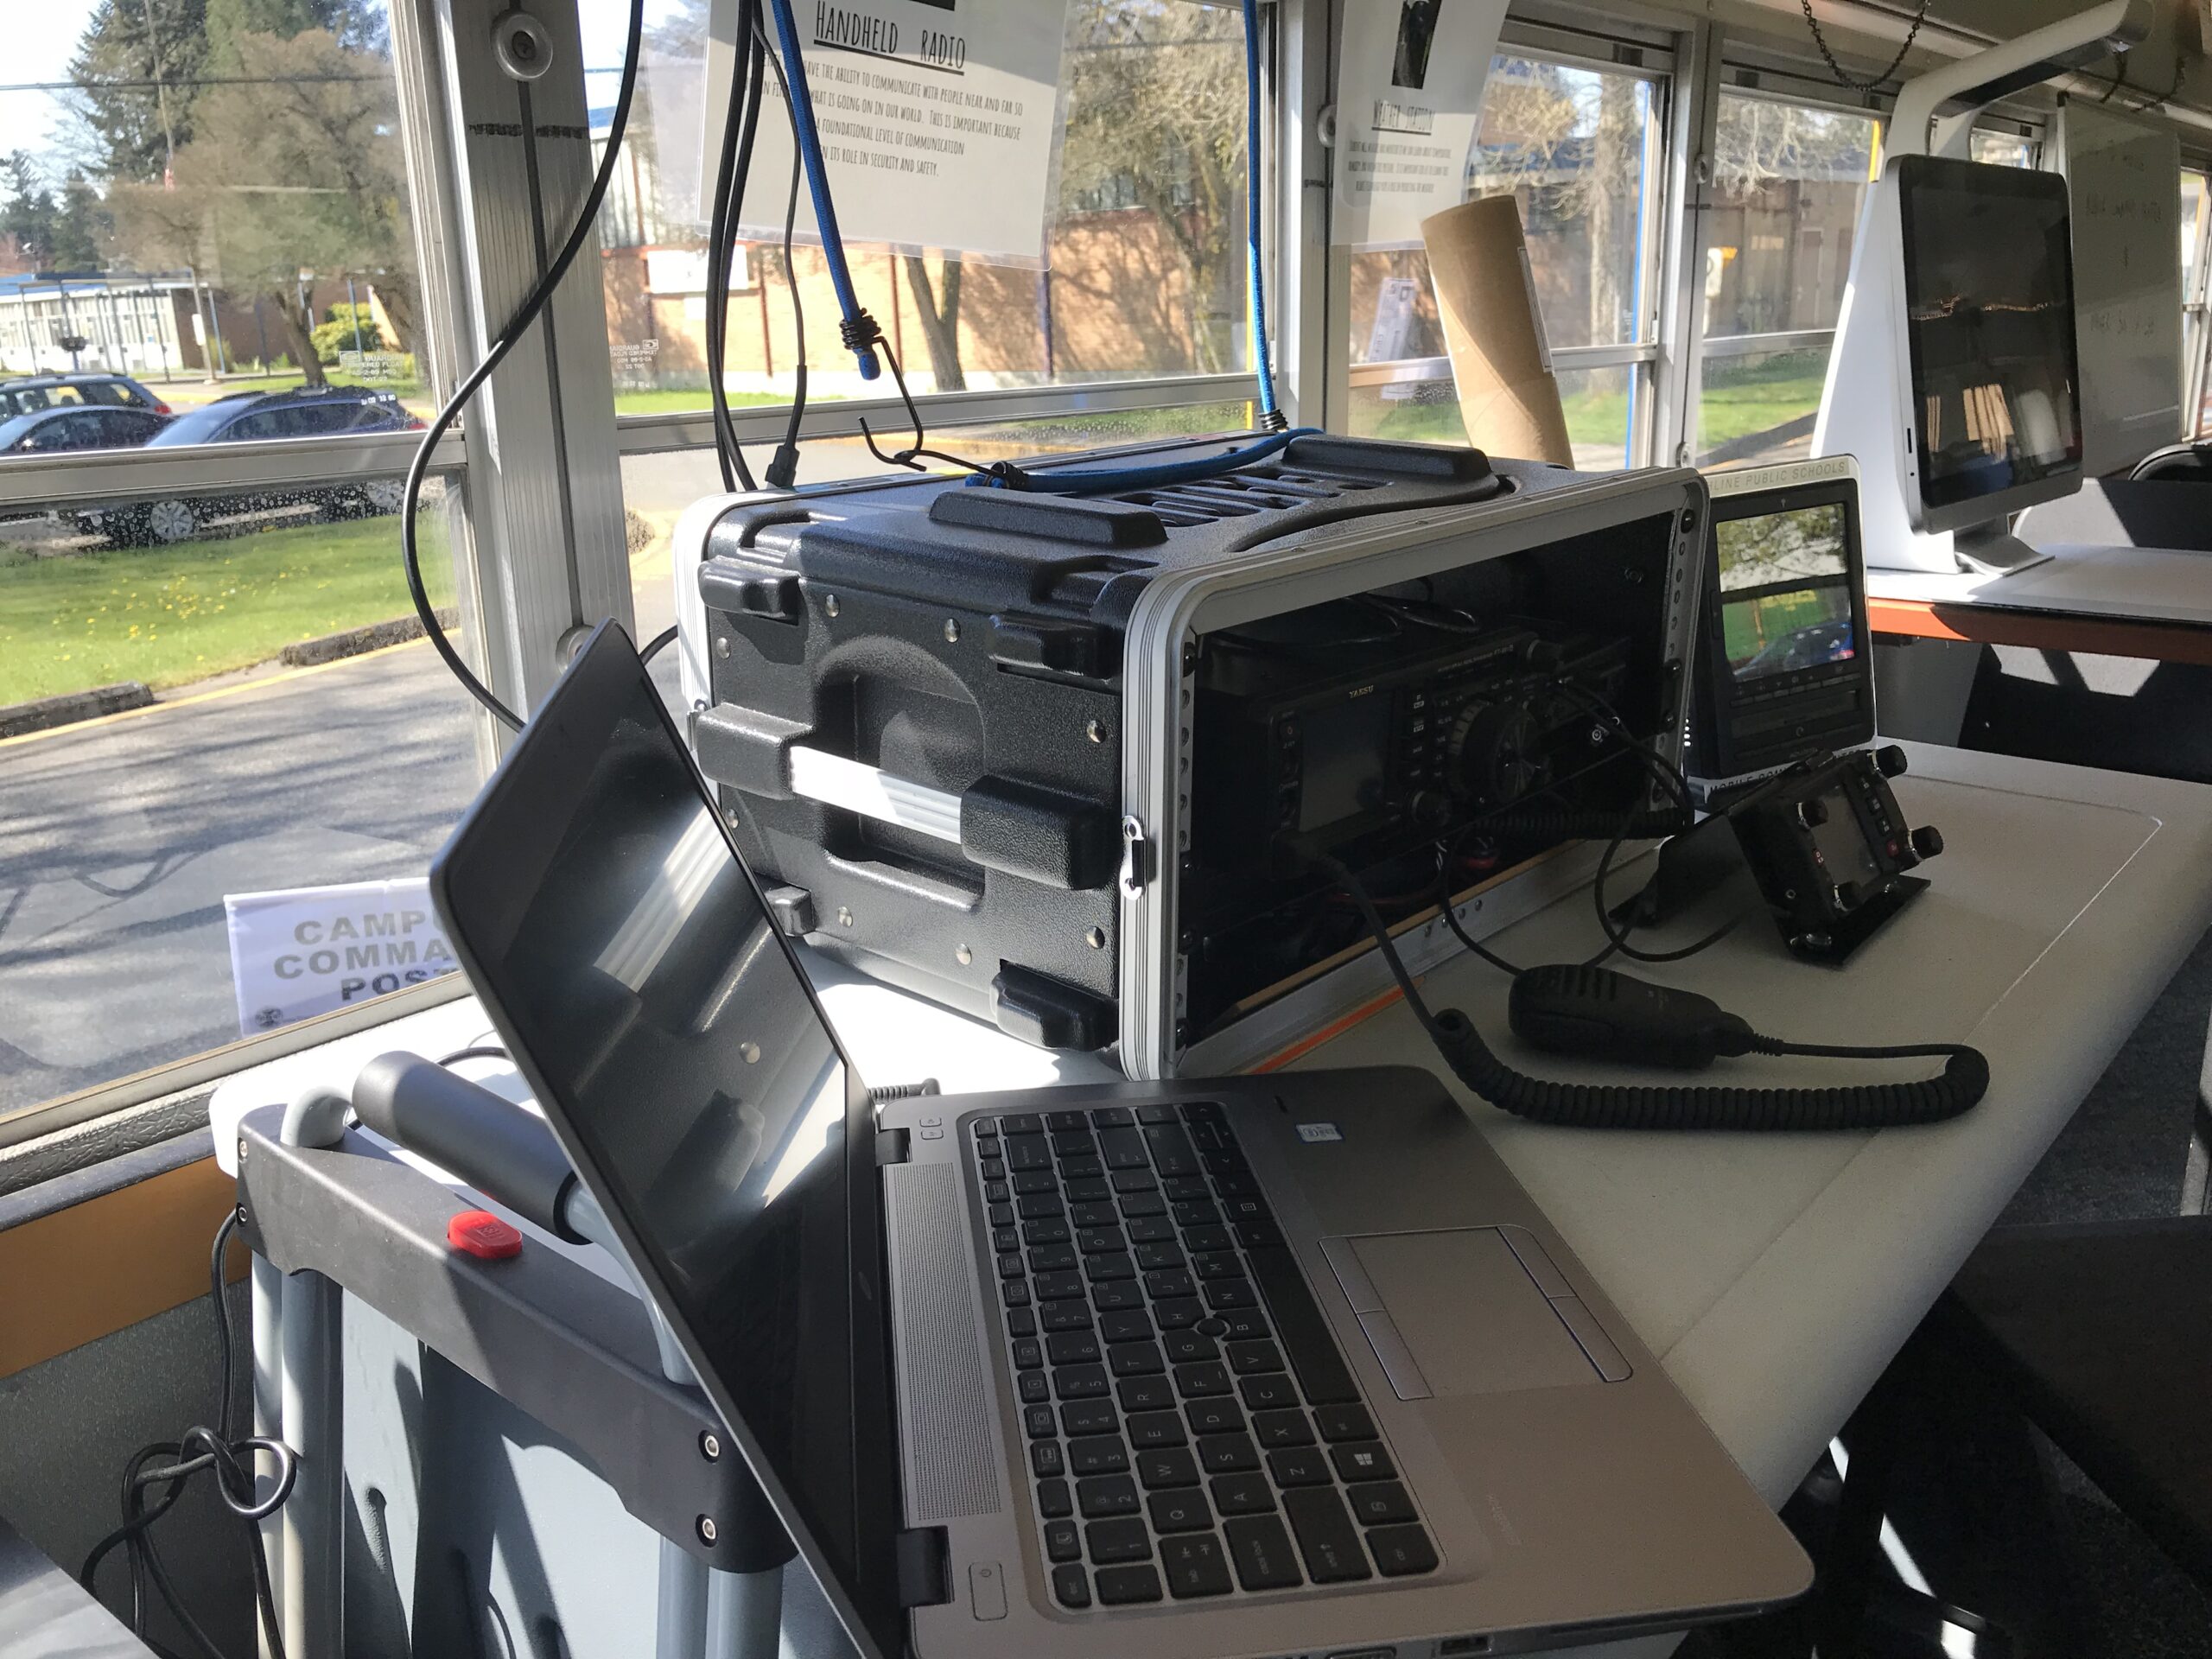 The bus is fully equipped for communication, including four ham radios, a J-pole and multi-function antenna tower, two 900Mhz radios, an 800Mhz radio, multi-carrier Cradle Point Access Point, cell carrier hotspots and more.